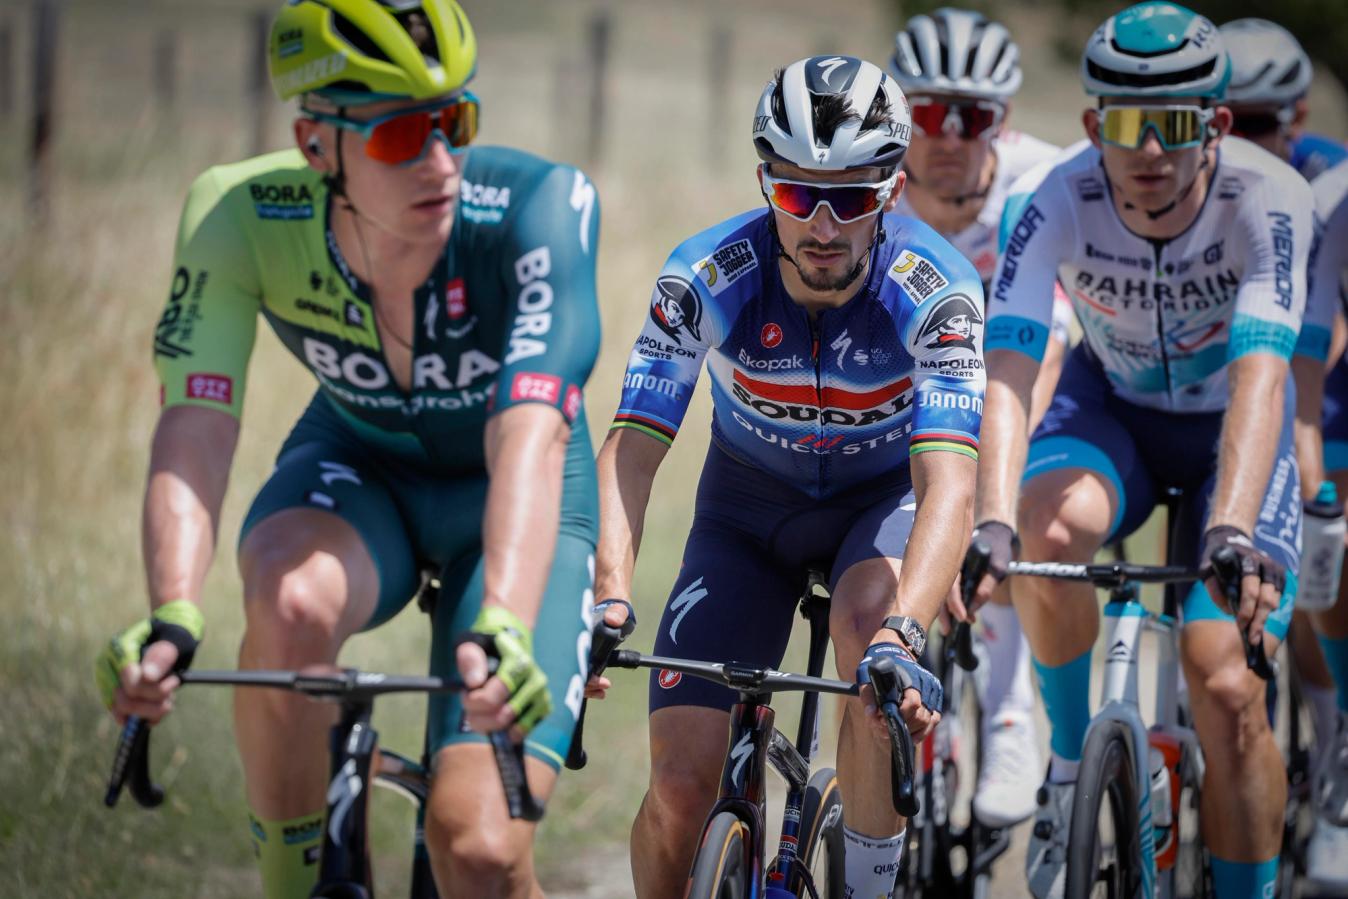 Alaphilippe was back in the wheels and looking sprightly at the Tour Down Under, as he prepares to return to former glories in 2024